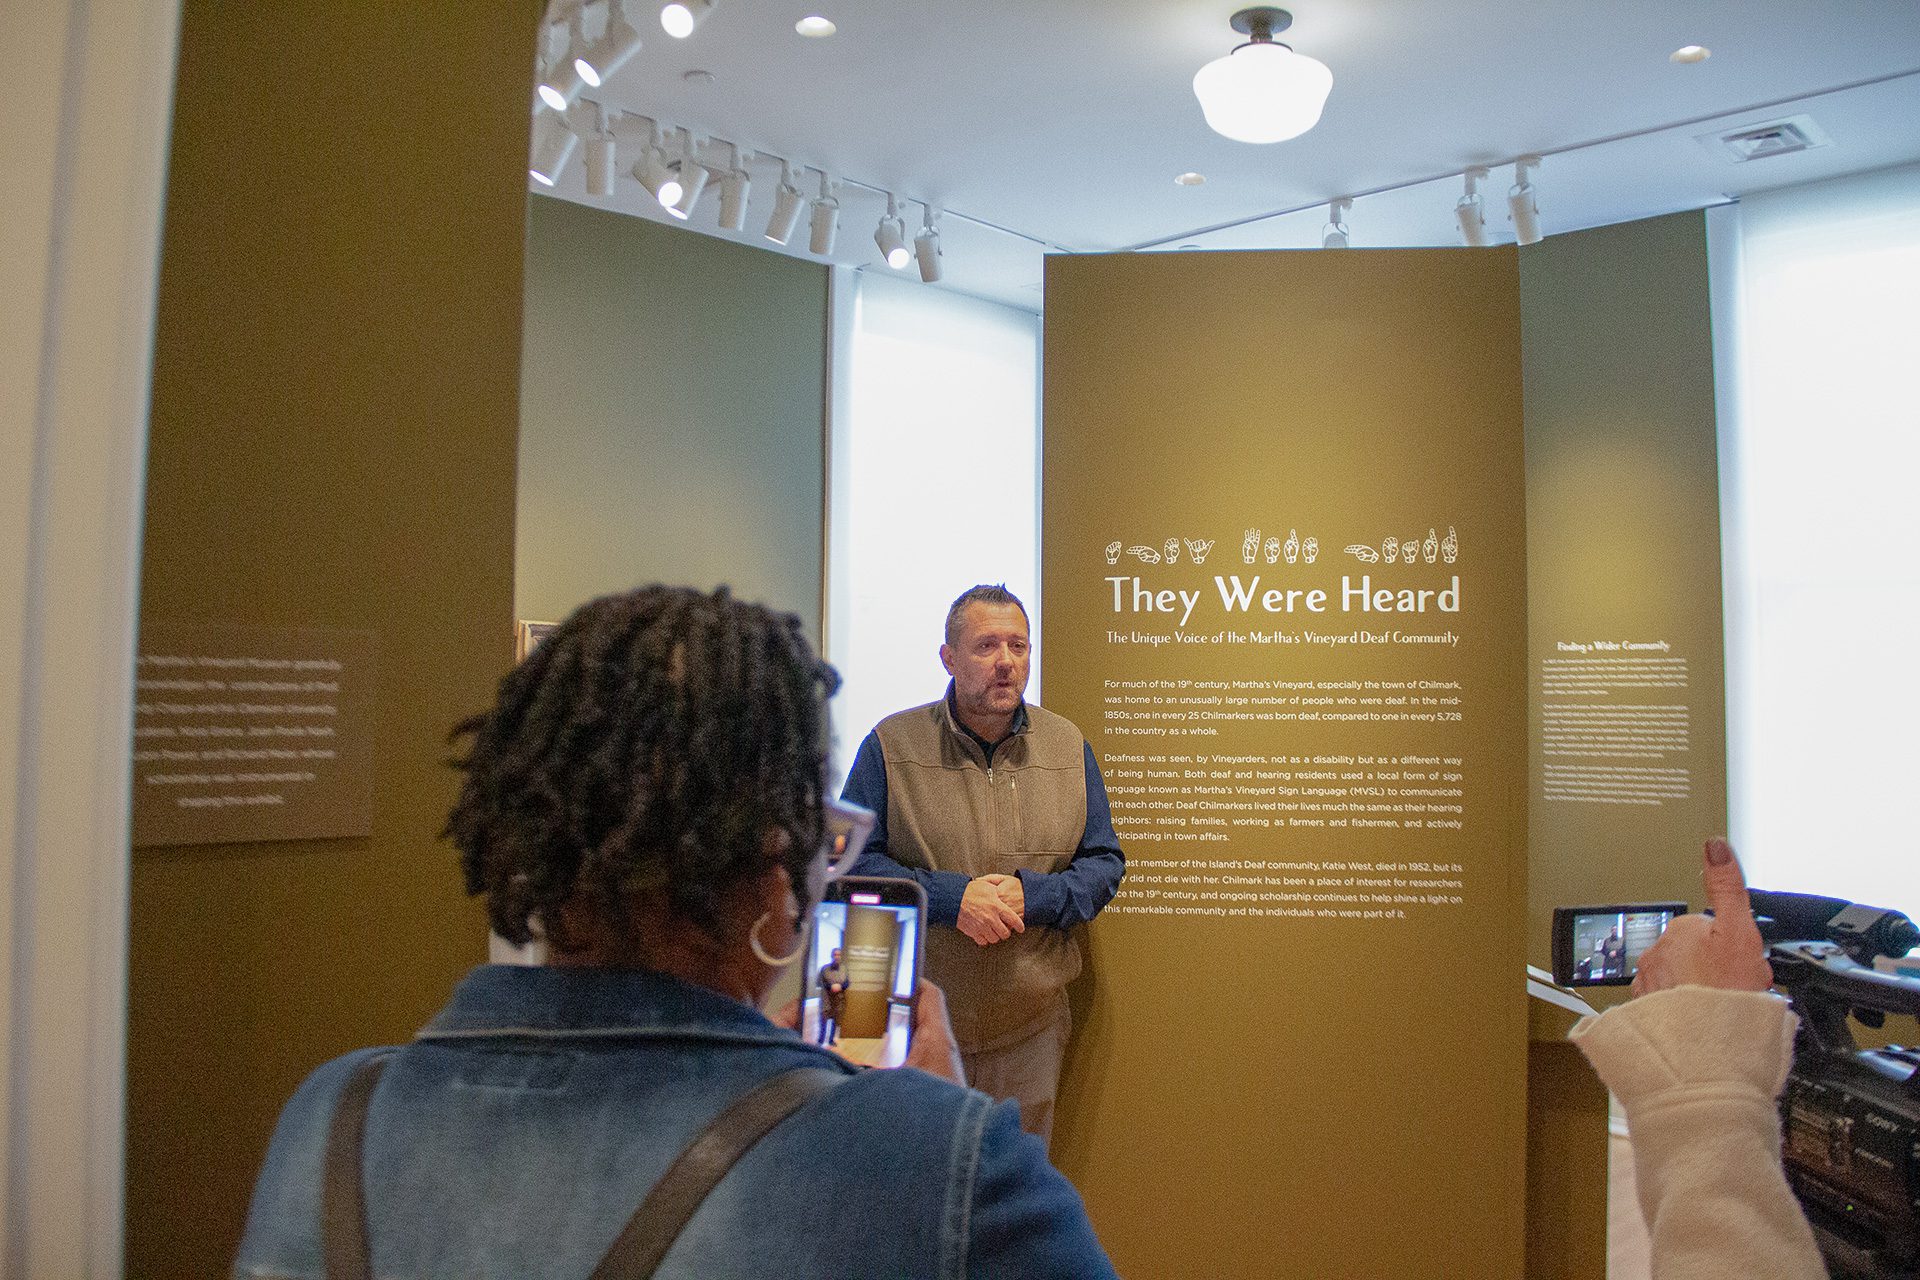 Jody Cripps is filmed while explaining the "They Were Heard" exhibit in the Martha's Vineyard Museum.